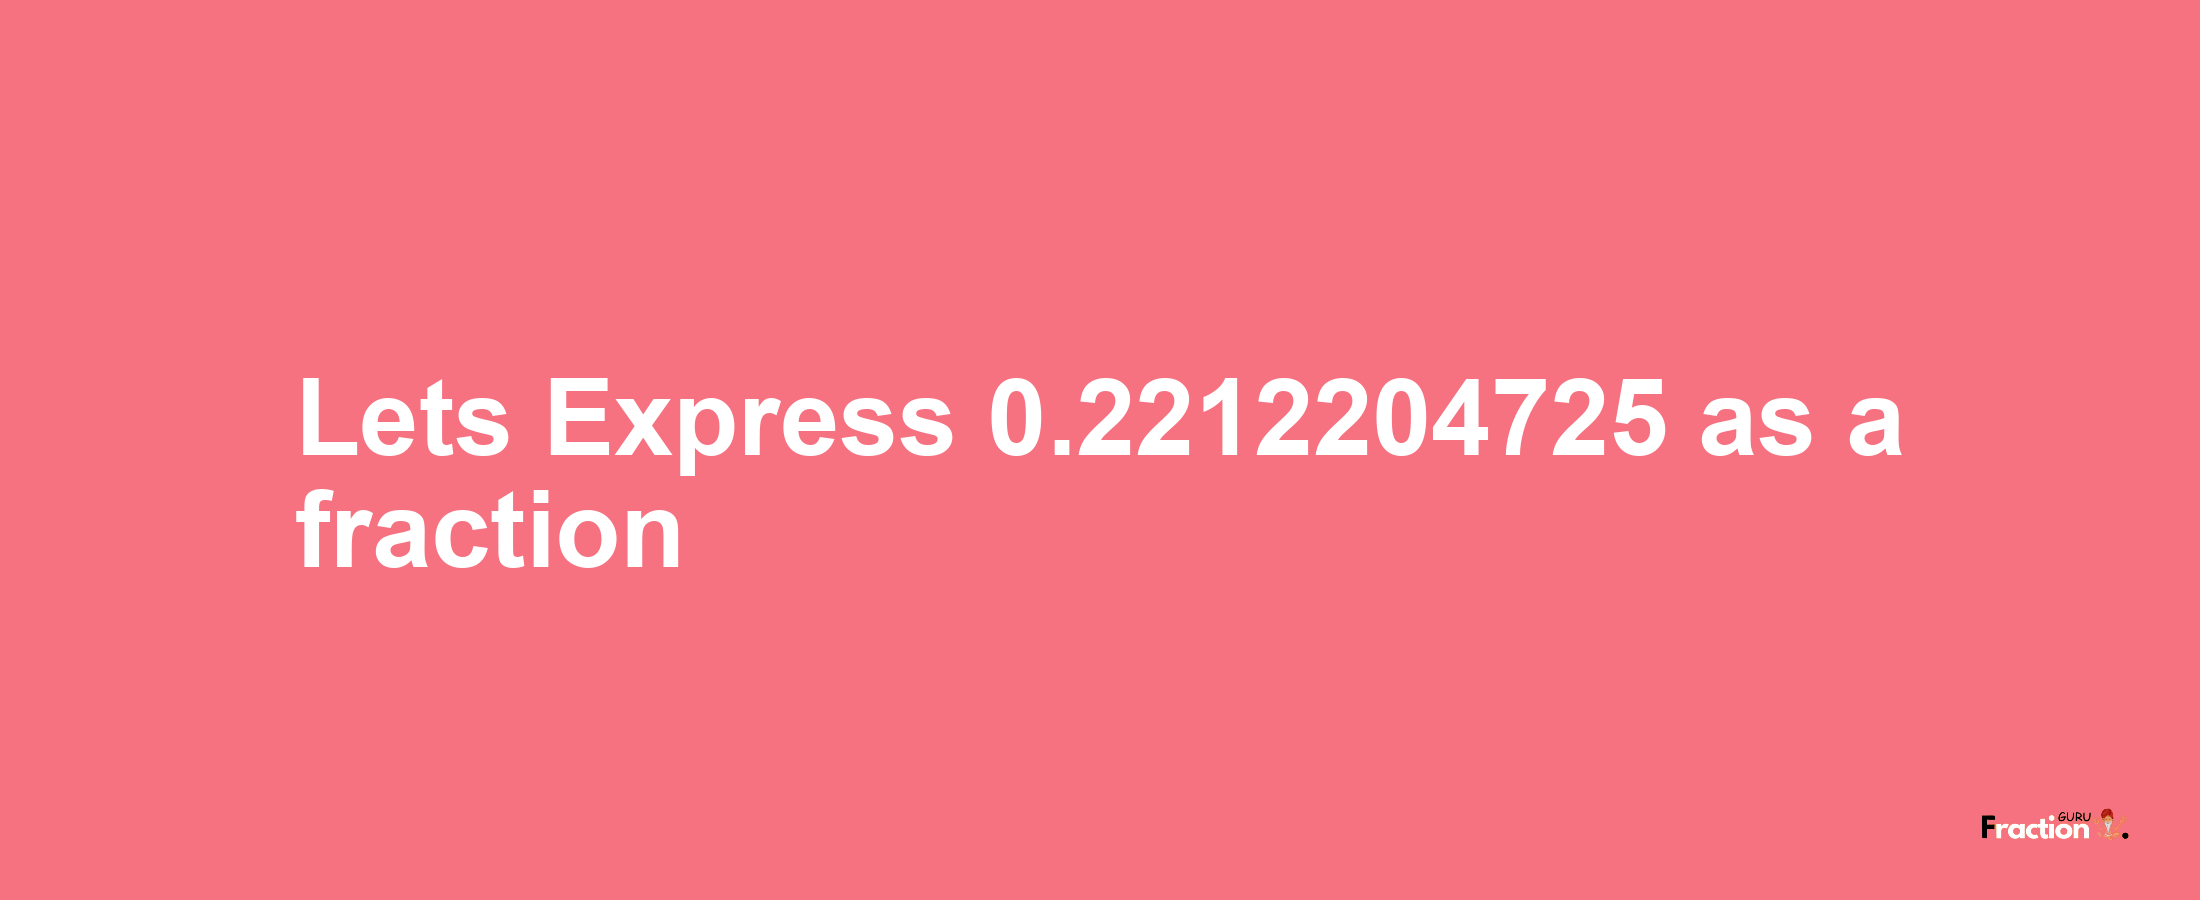 Lets Express 0.2212204725 as afraction